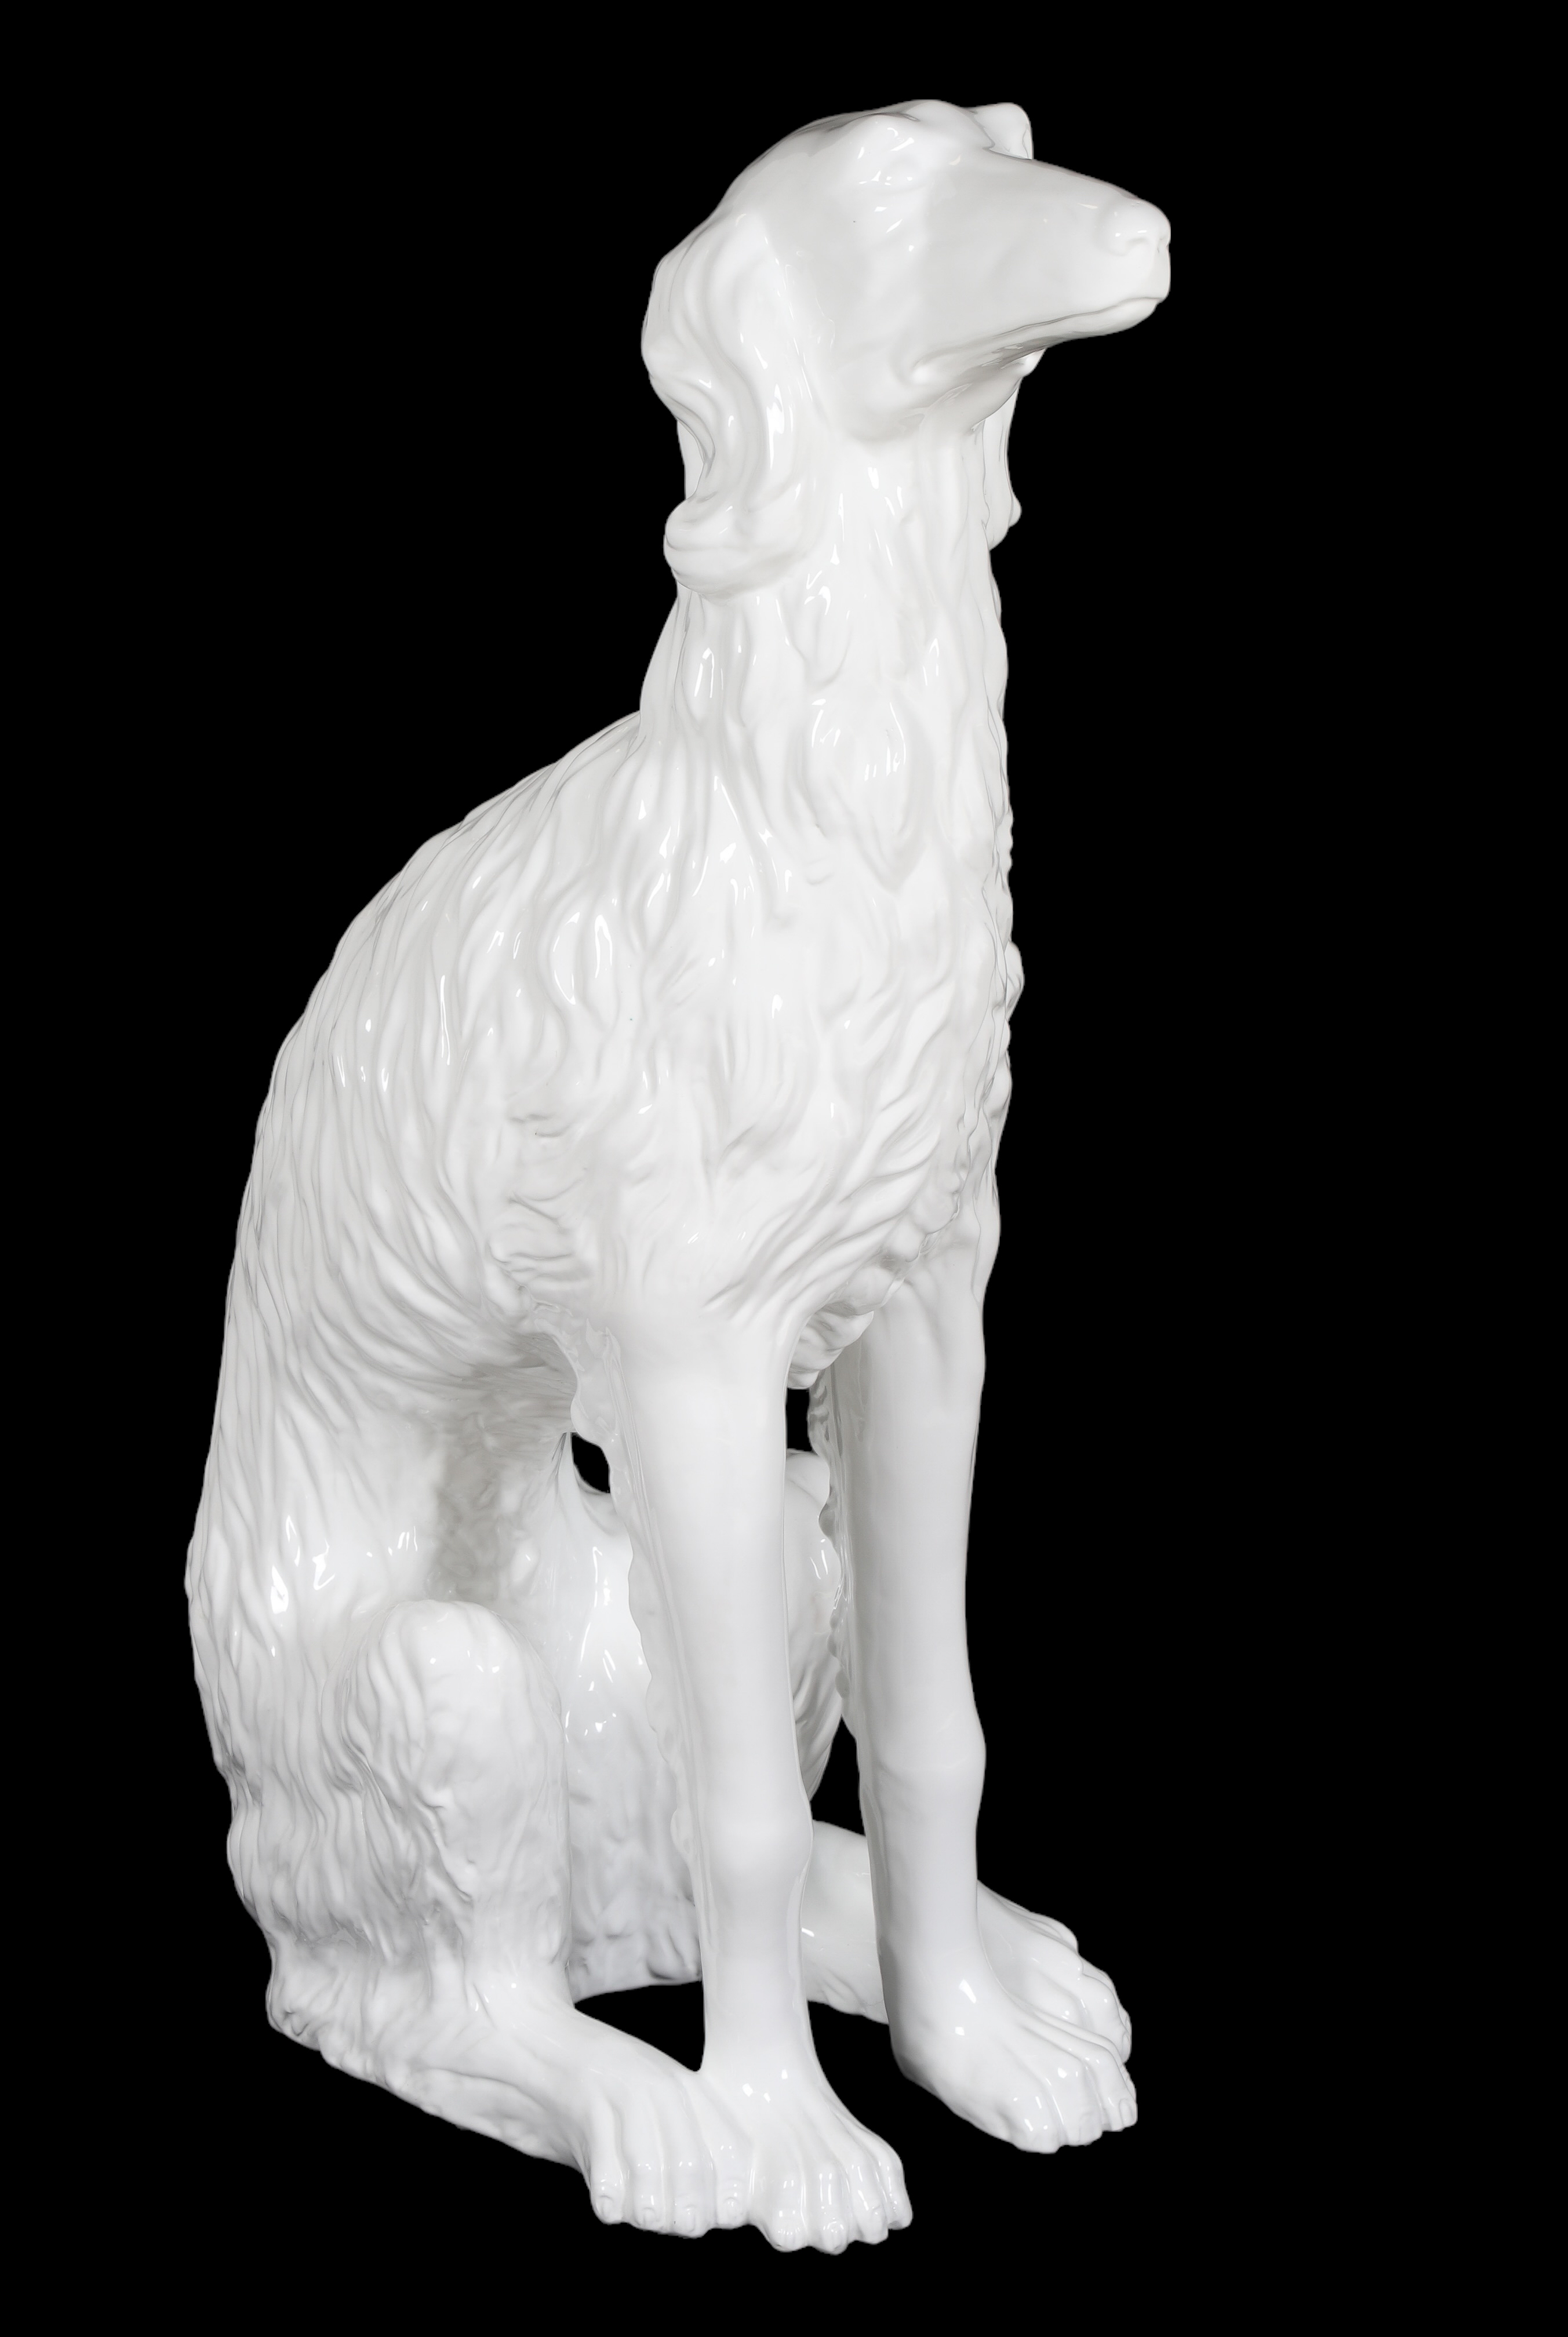 Ceramic statue of whippet in sitting